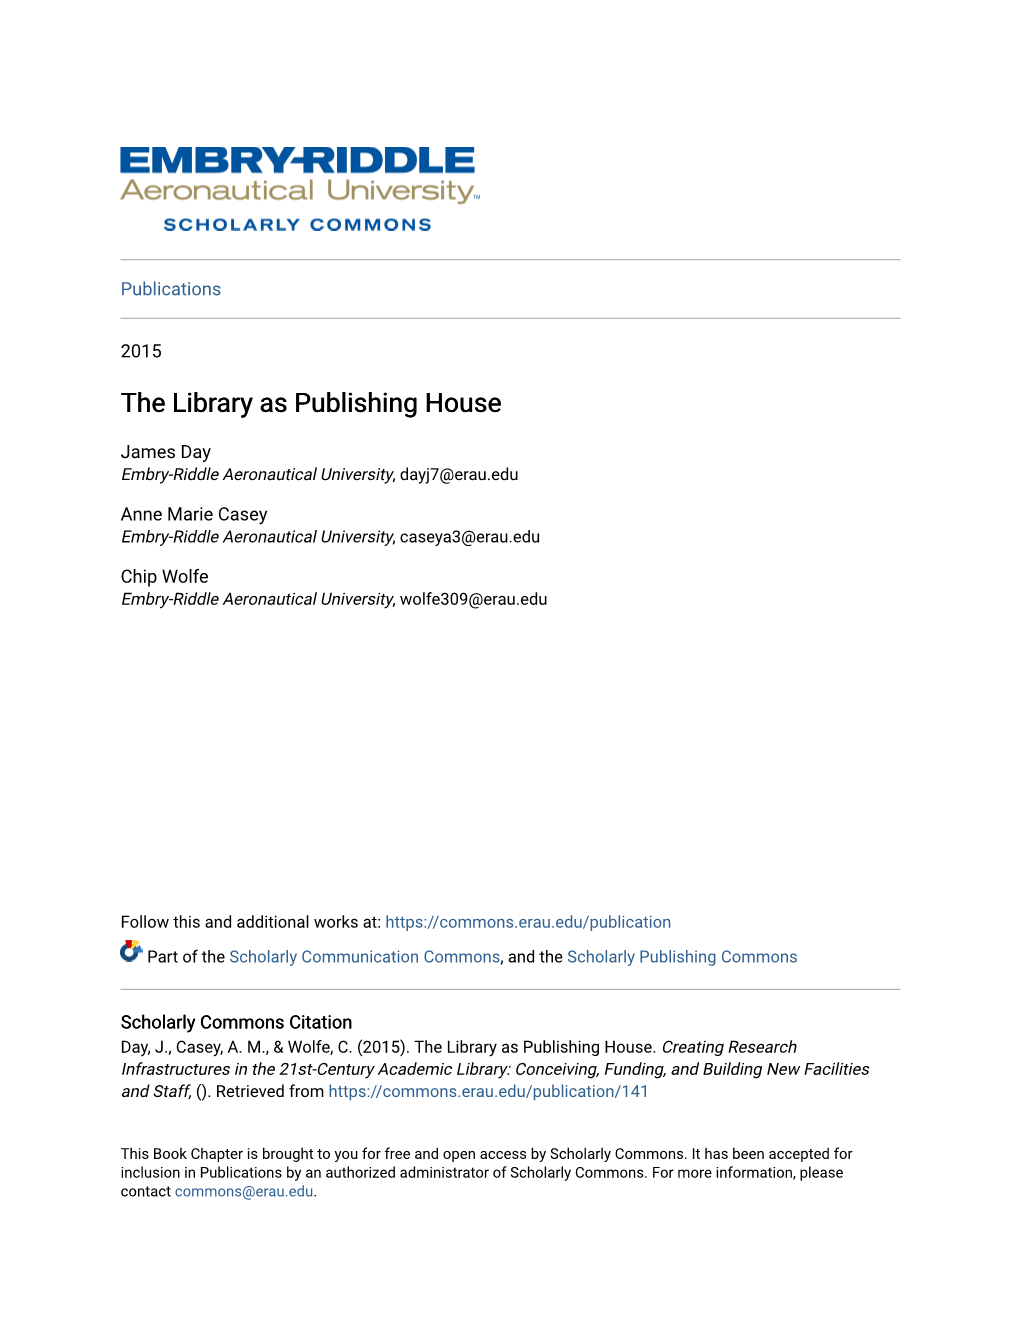 The Library As Publishing House